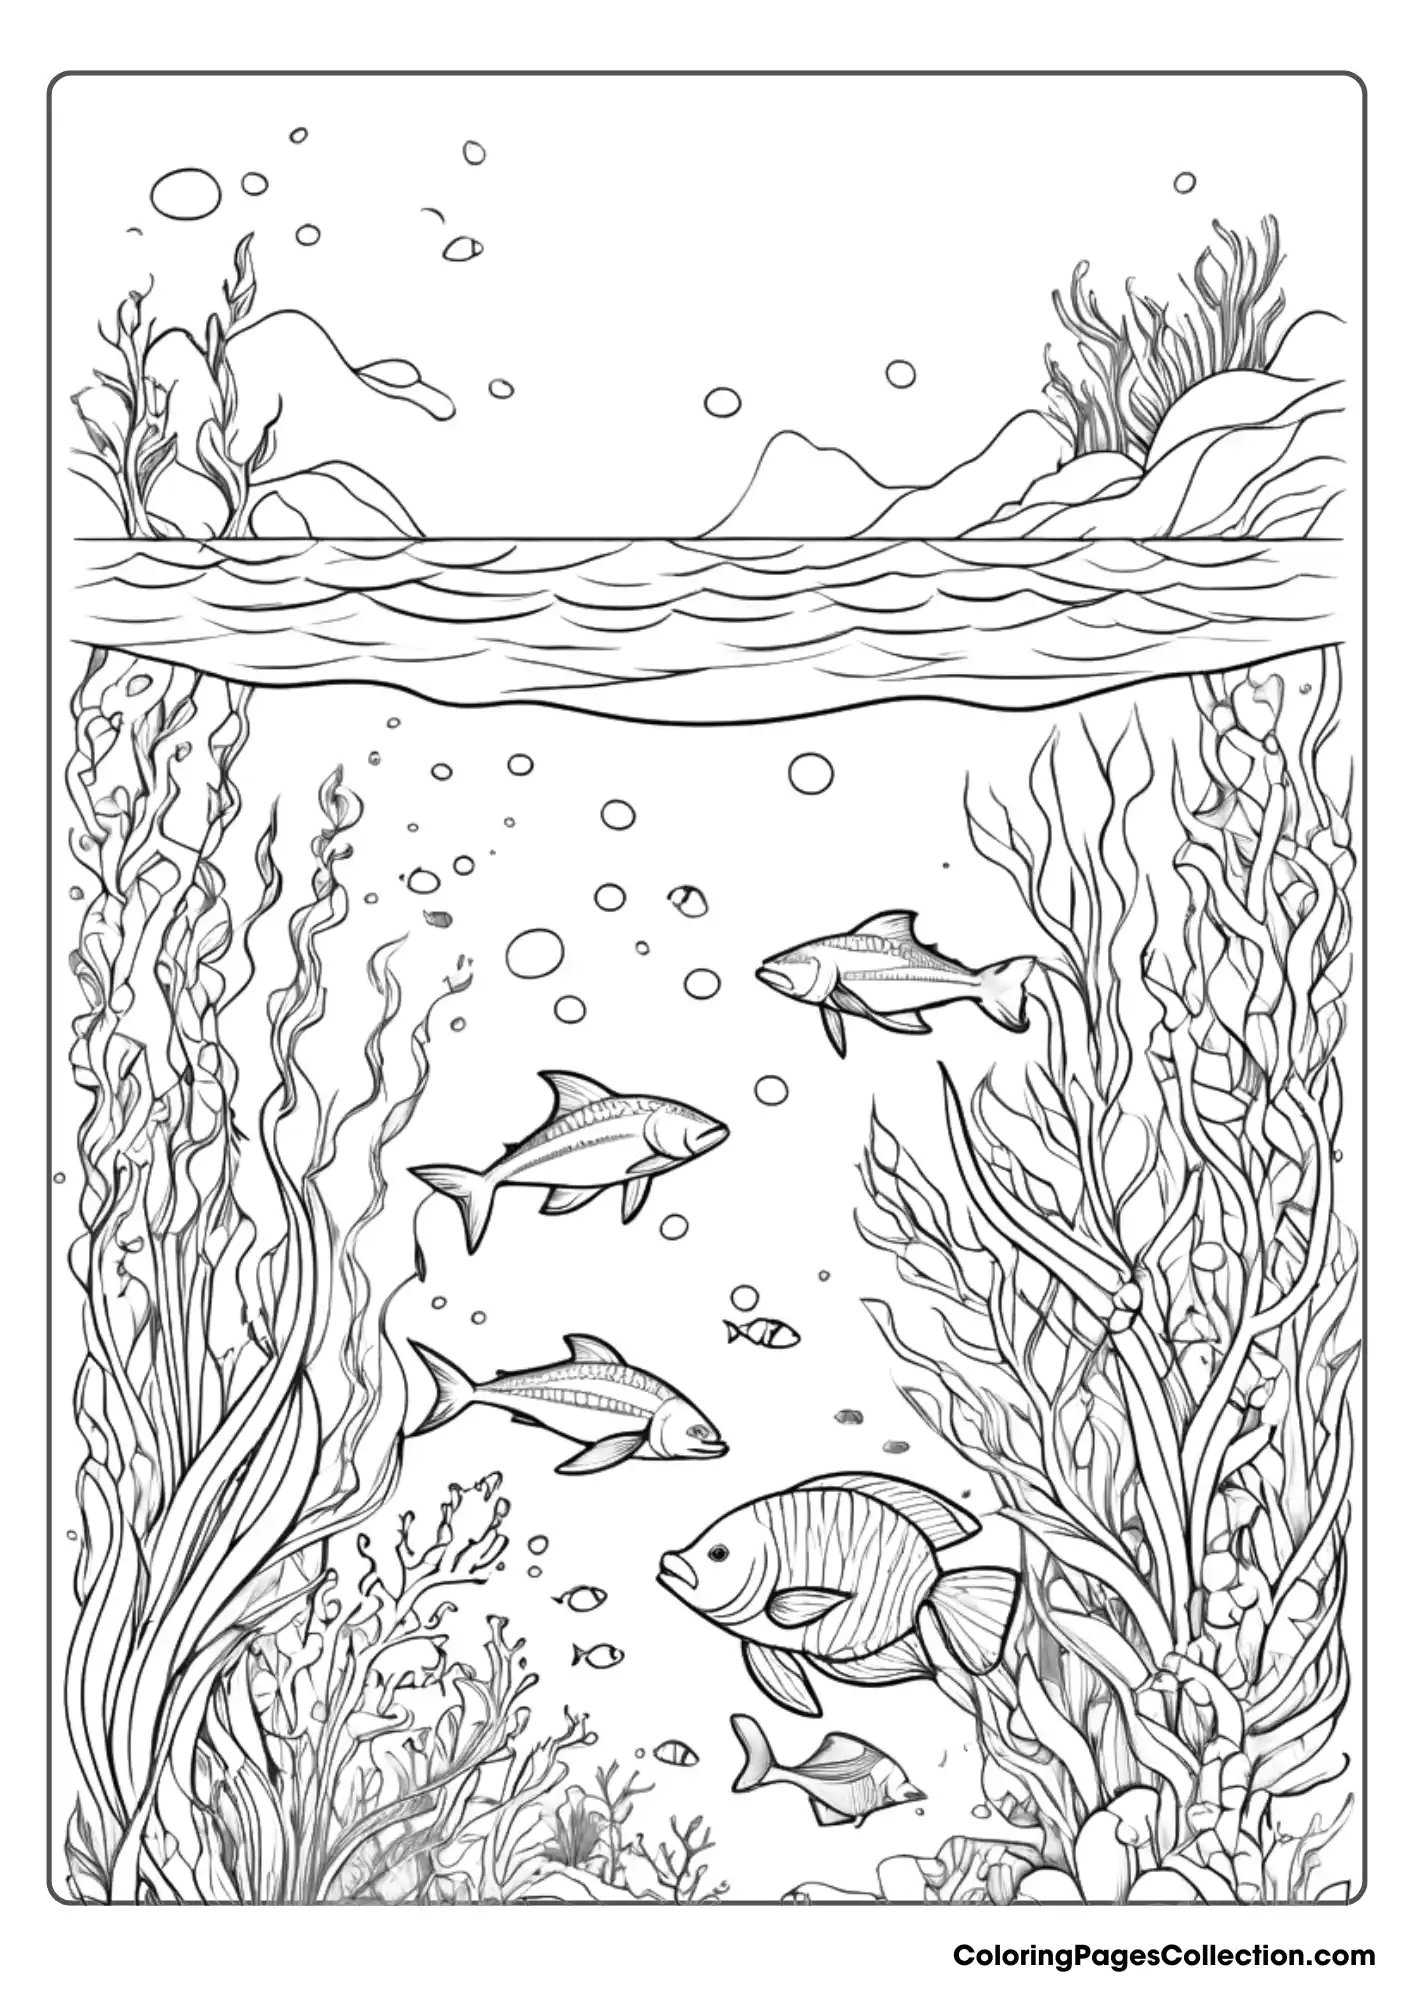 Coloring pages for teens, Underwater Coloring Page